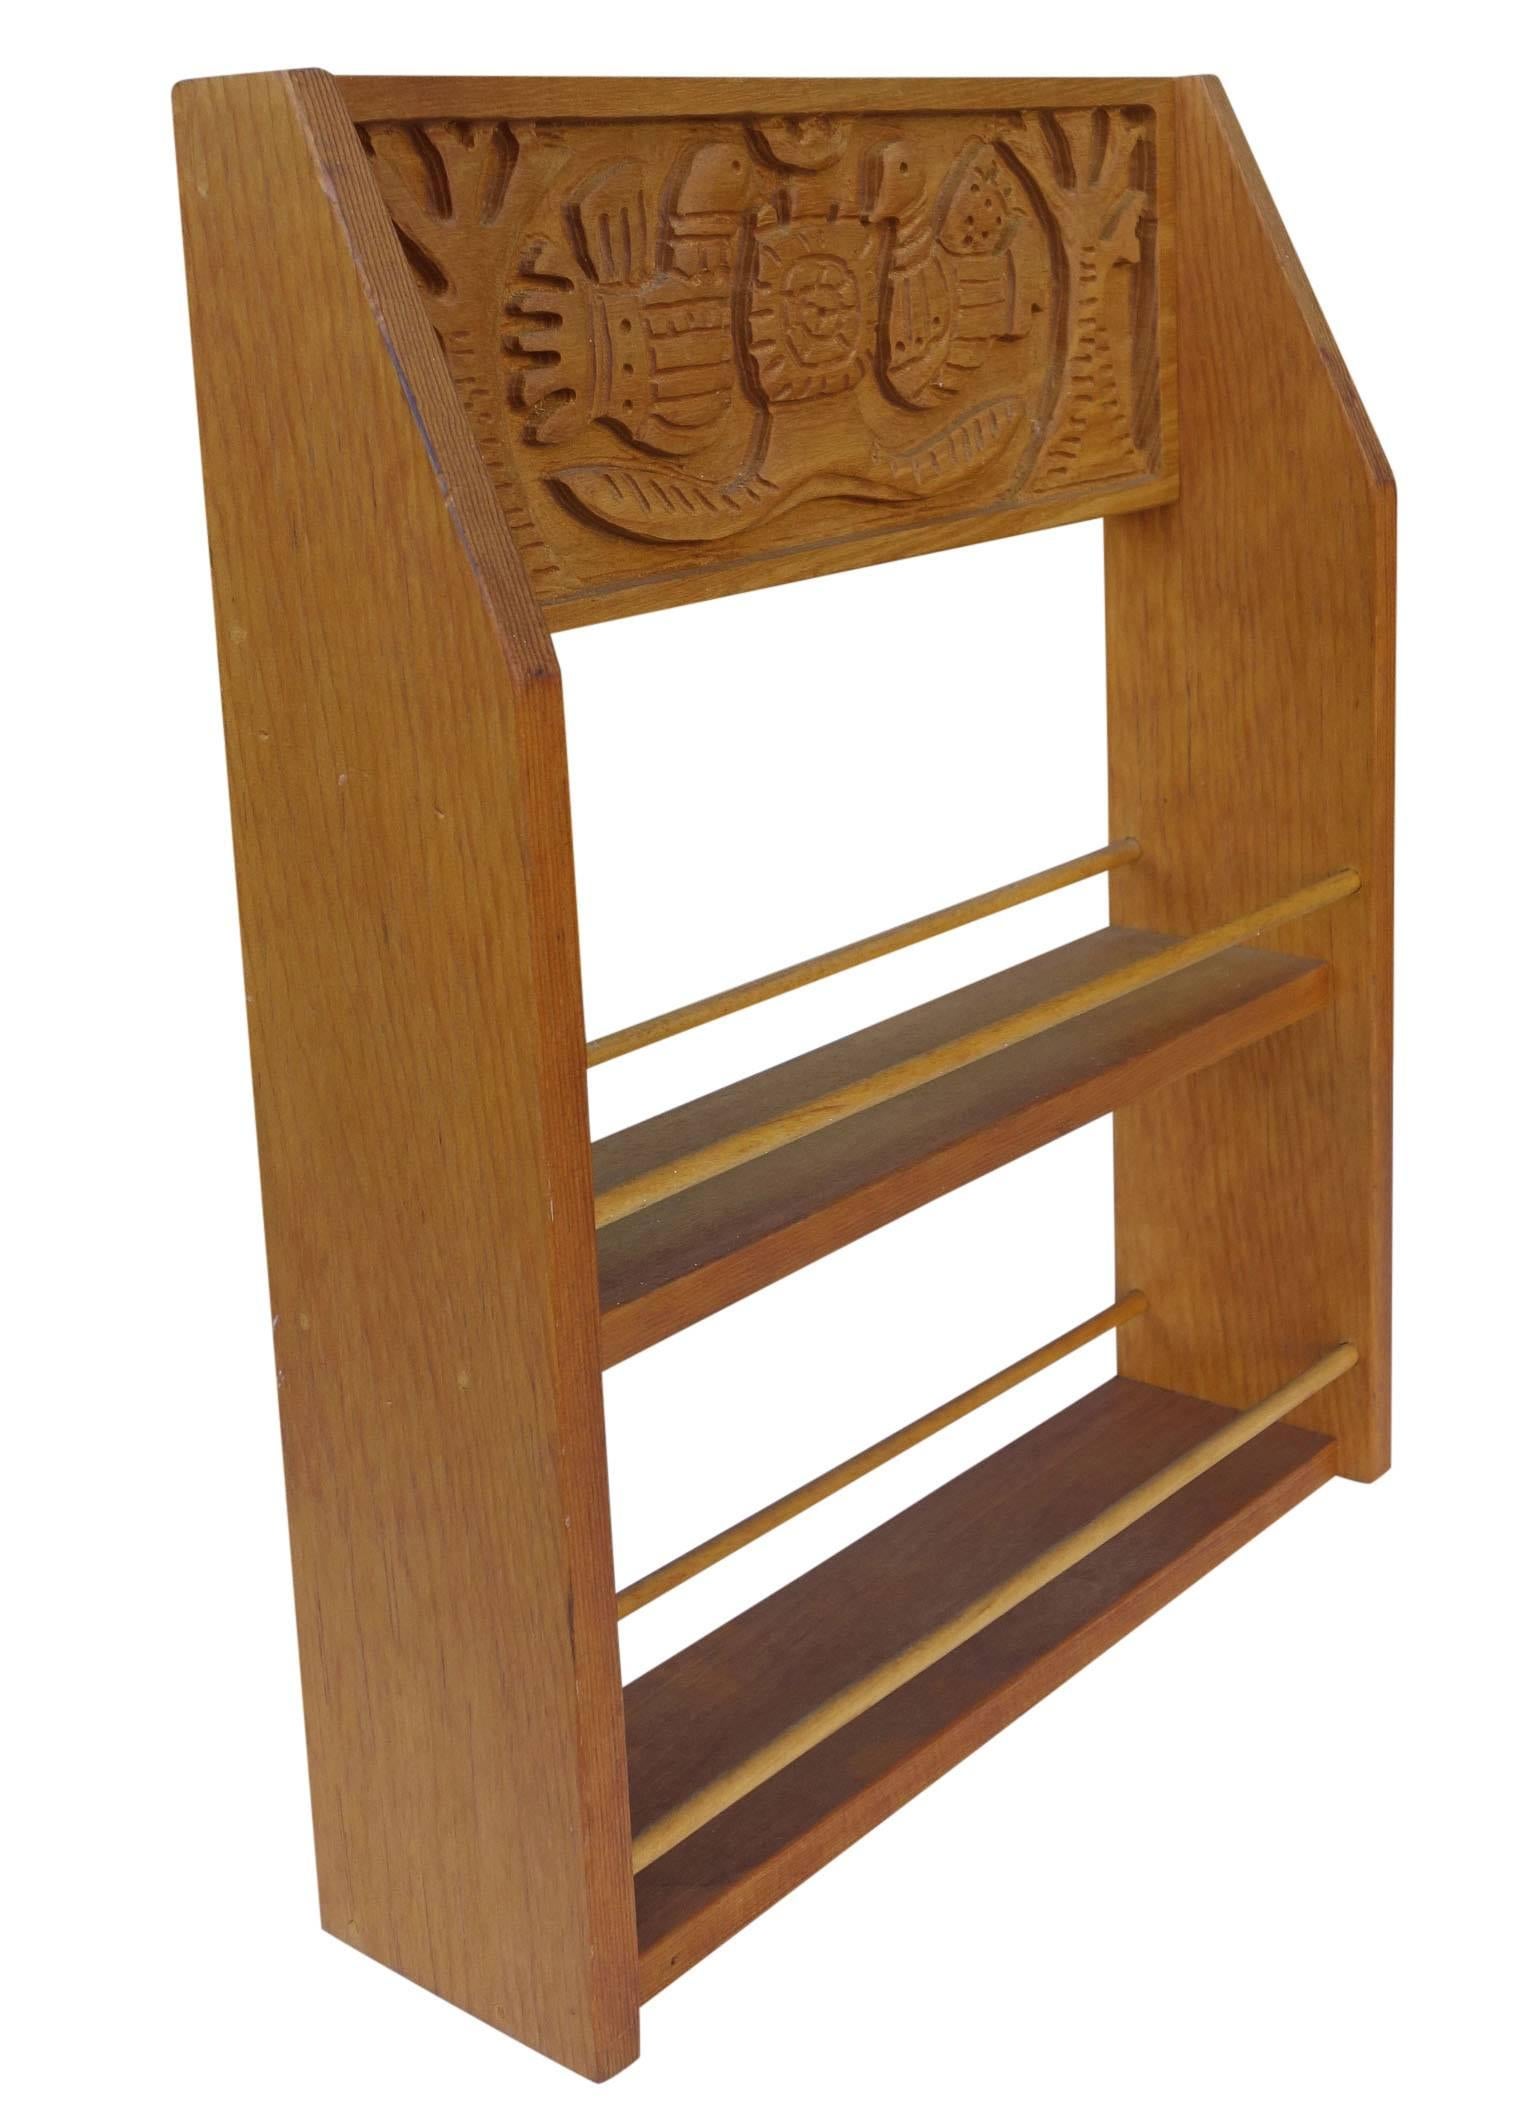 Beautiful carved wood spice rack.
Playing a central role as designer-craftsmen, Jerome and Evelyn Ackerman helped to shape what is now known as California Mid-Century Modern style.